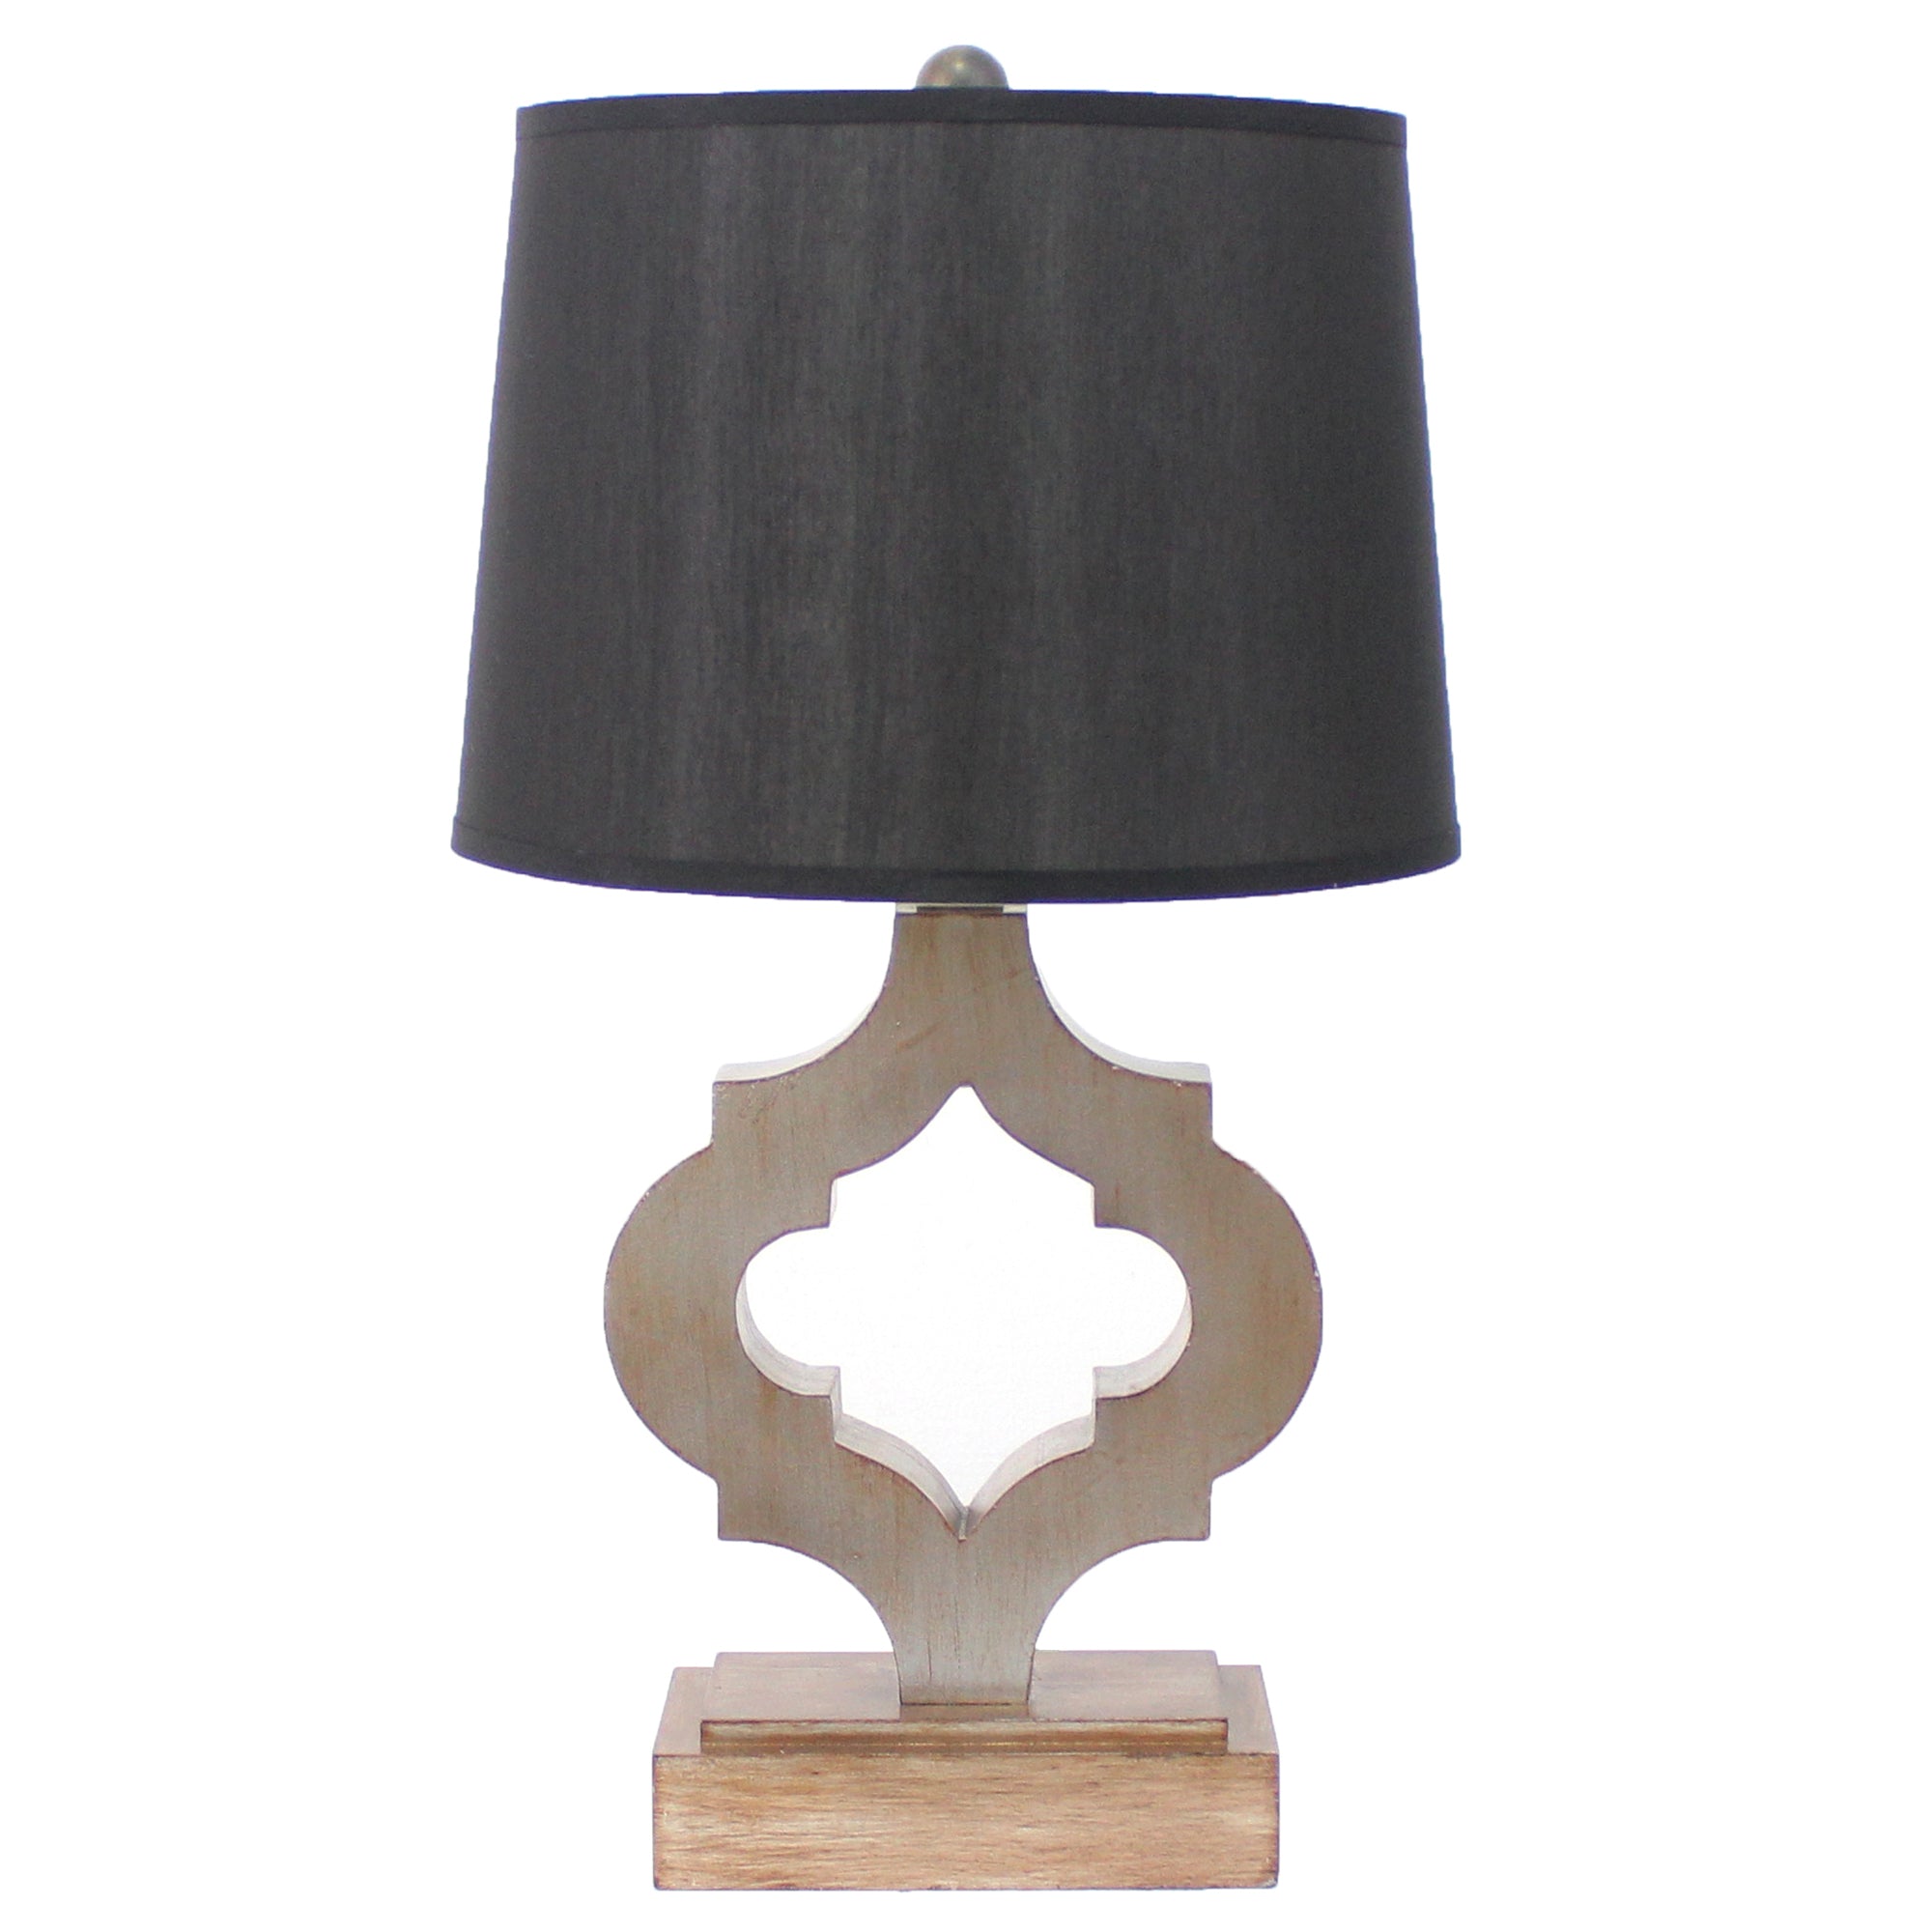 12 x 14 x 25.25 Black Traditional Wooden Linen Shade - Table Lamp